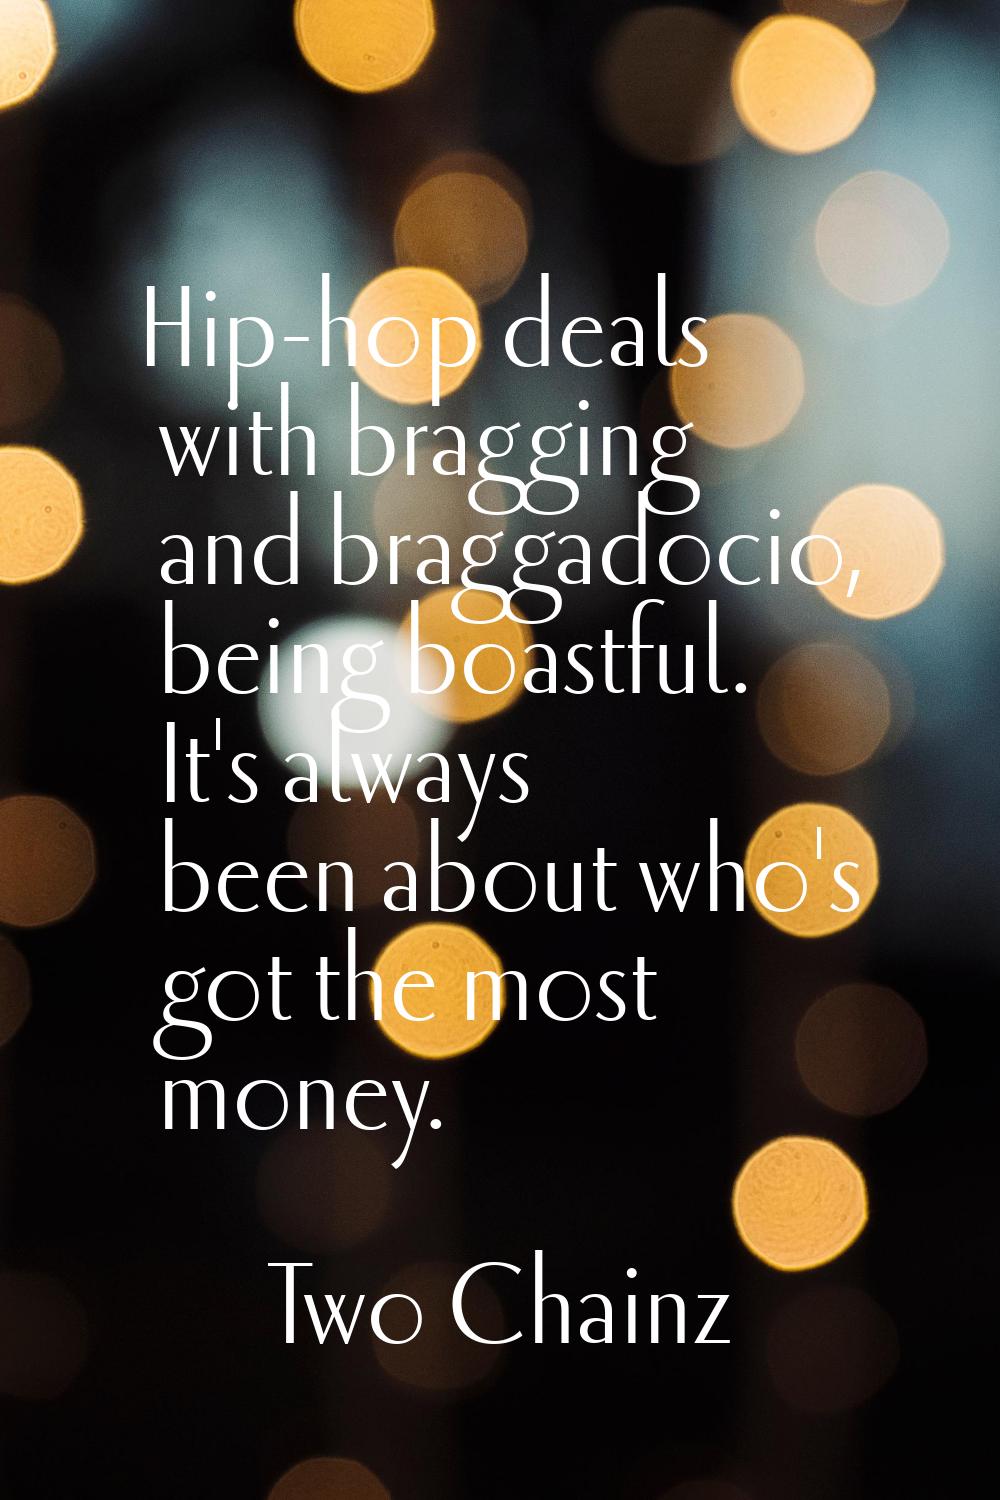 Hip-hop deals with bragging and braggadocio, being boastful. It's always been about who's got the m